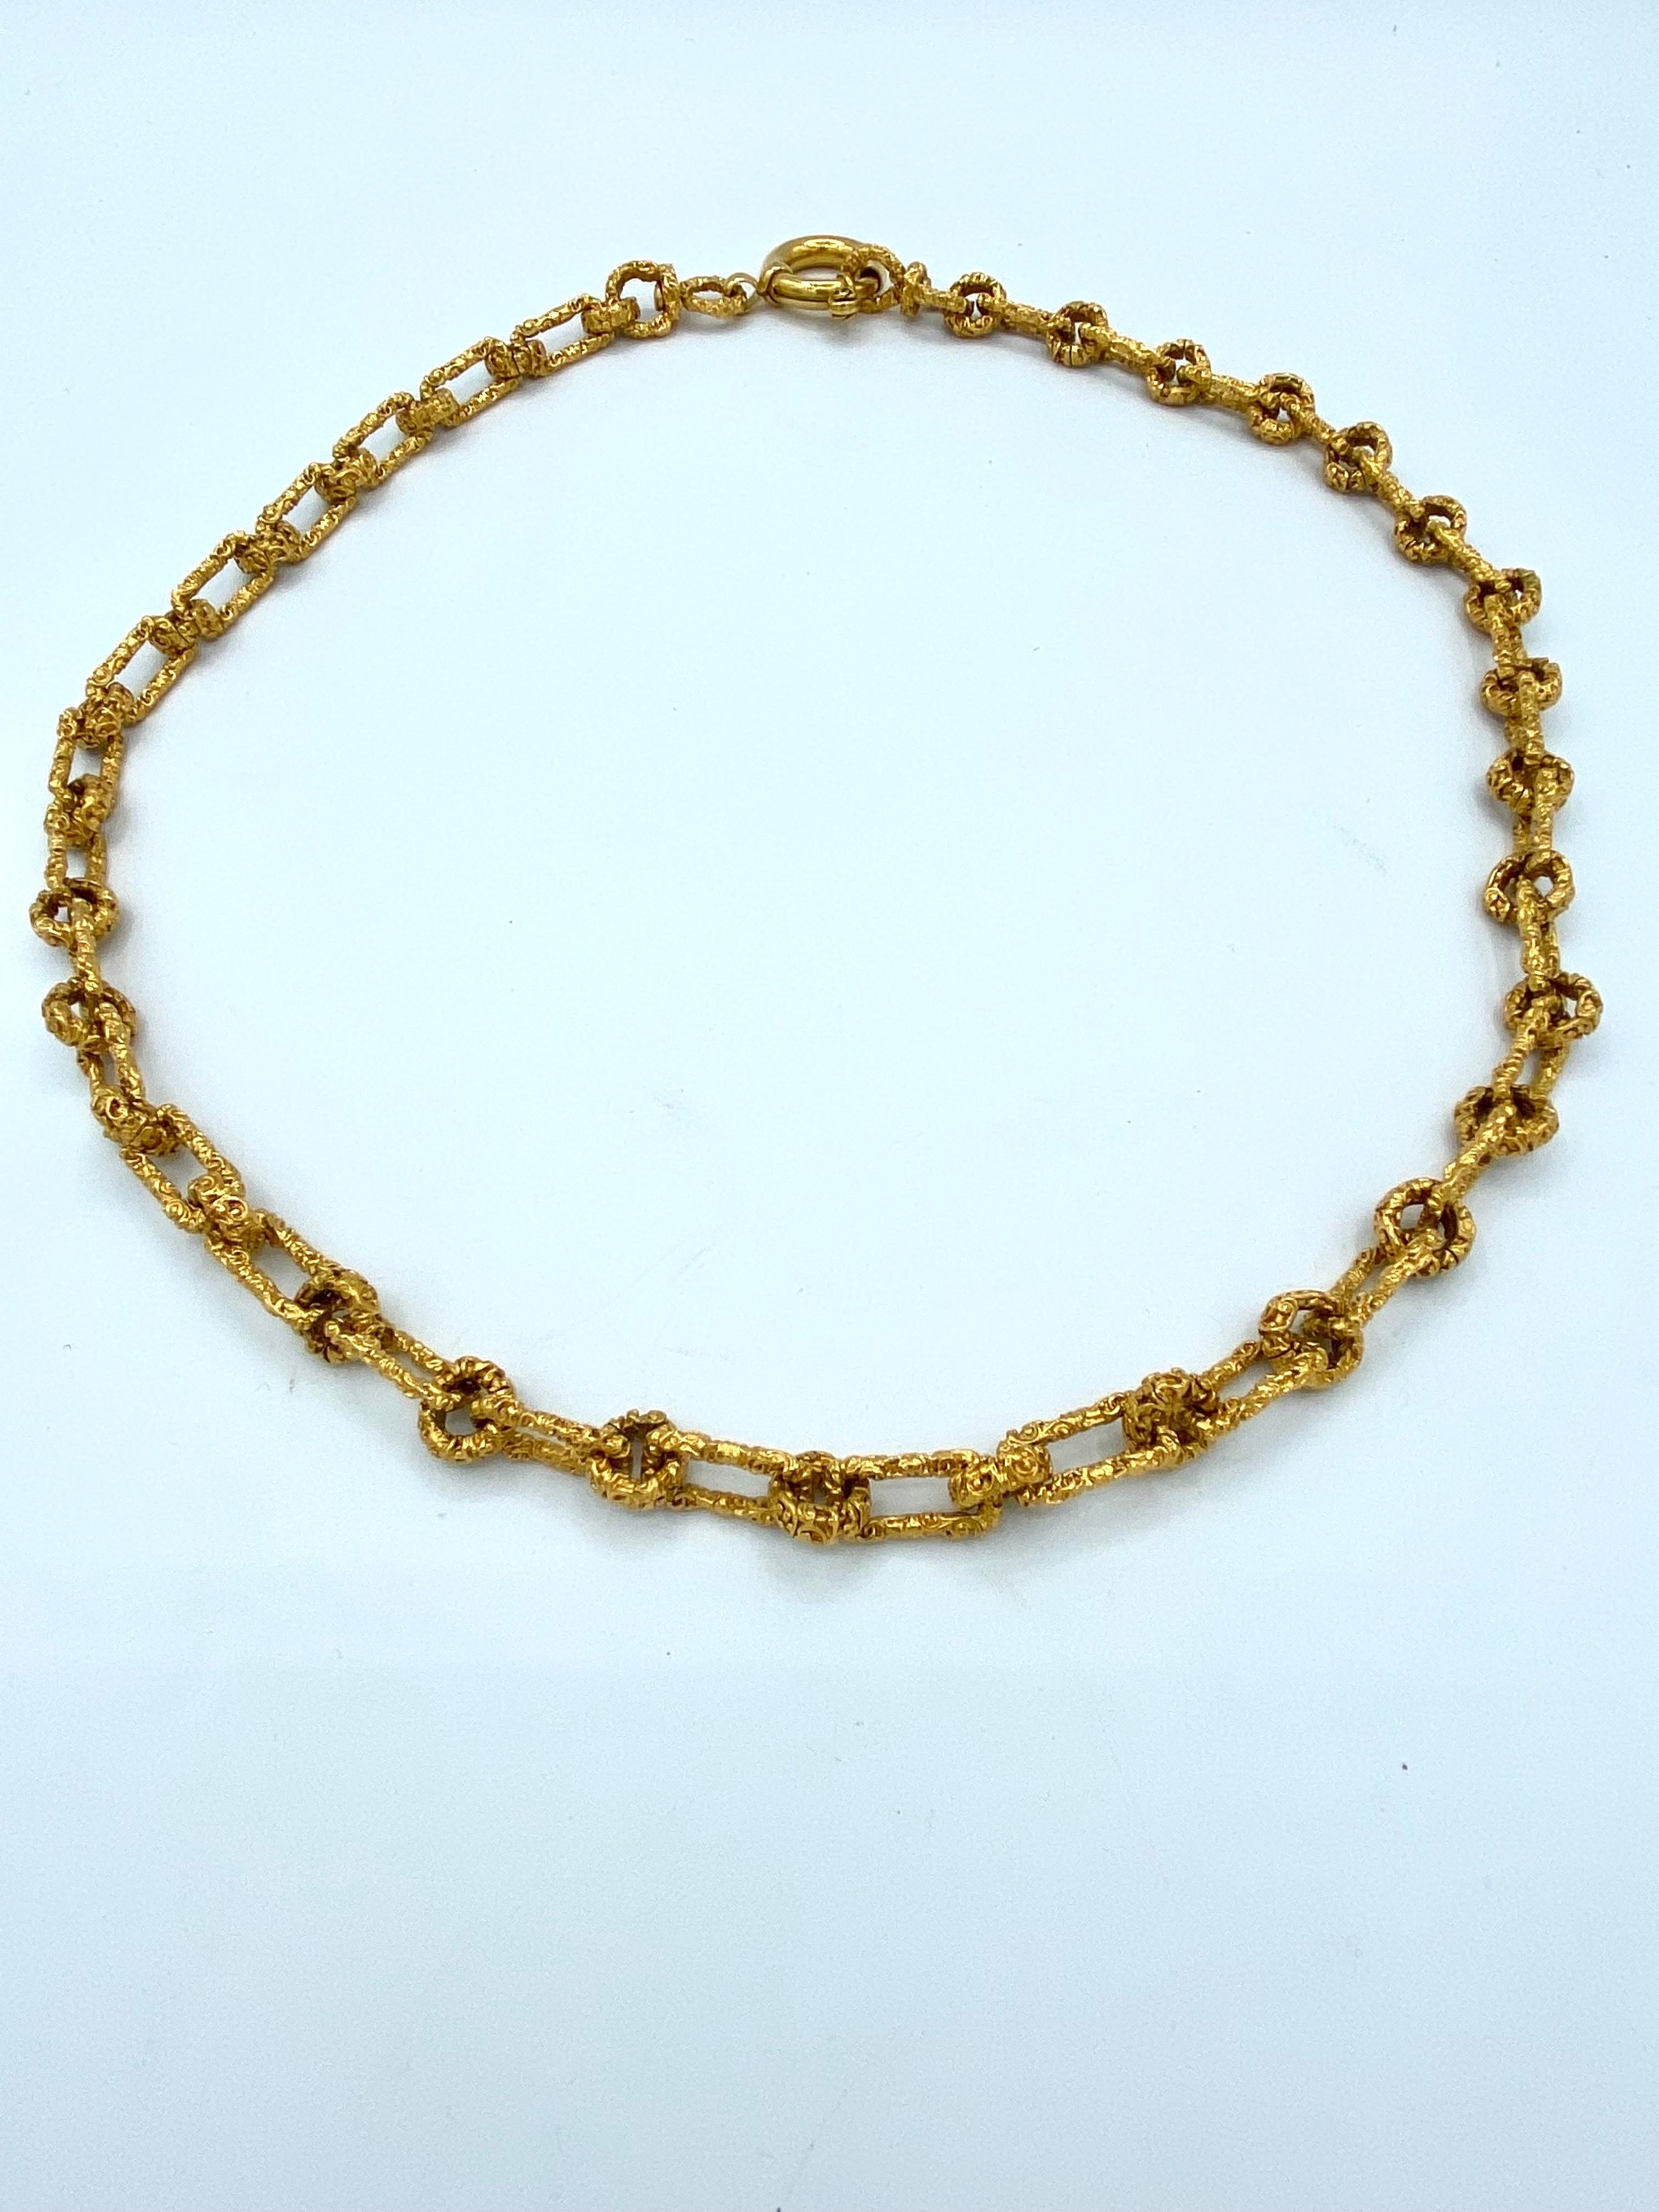 Superb vintage Chanel necklace from the 1990s, gold chain with round and rectangular flower links with the textured and interlaced CC pattern.
Round zipper with the interlaced CC logo.
Total length 82.7cm
Maximum width 1.6cm
The clasp is 3.5cm
Comes